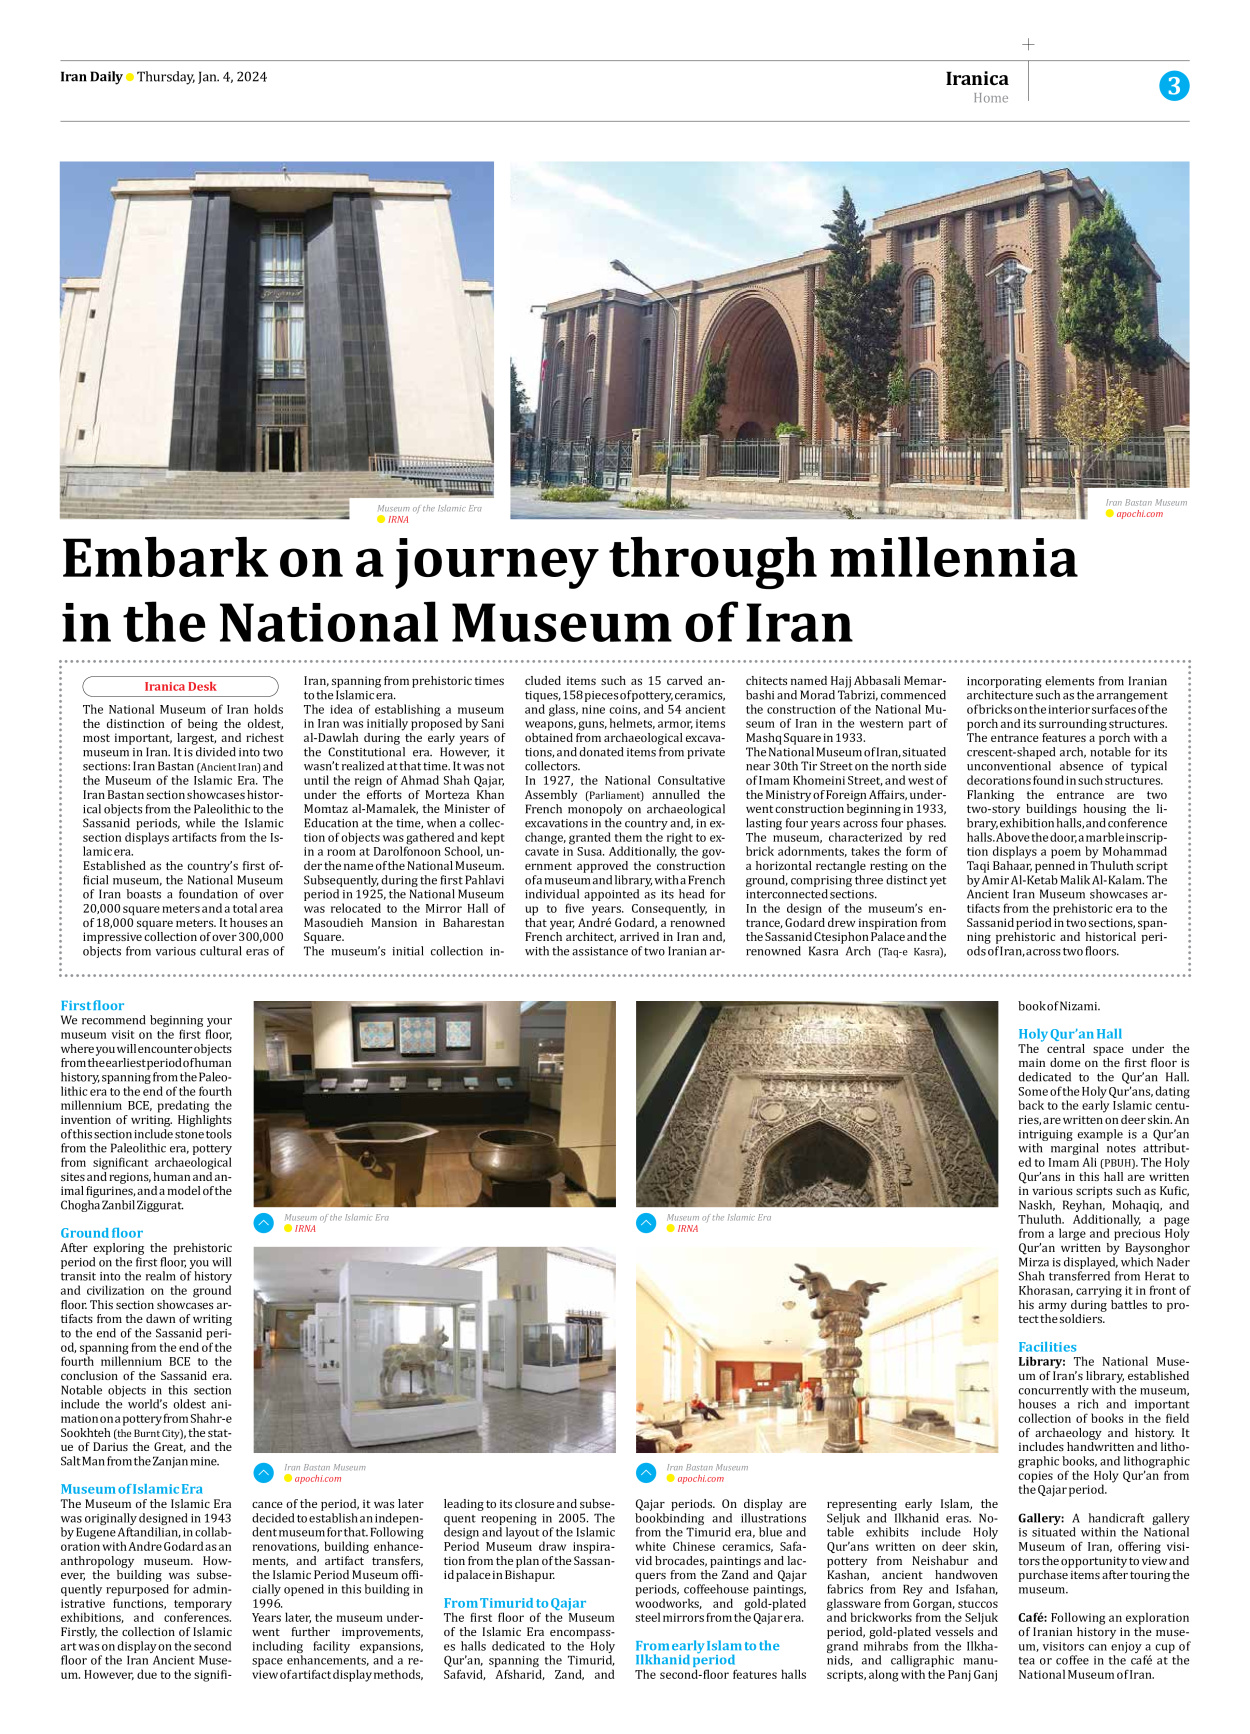 Iran Daily - Number Seven Thousand Four Hundred and Seventy Six - 04 January 2024 - Page 3